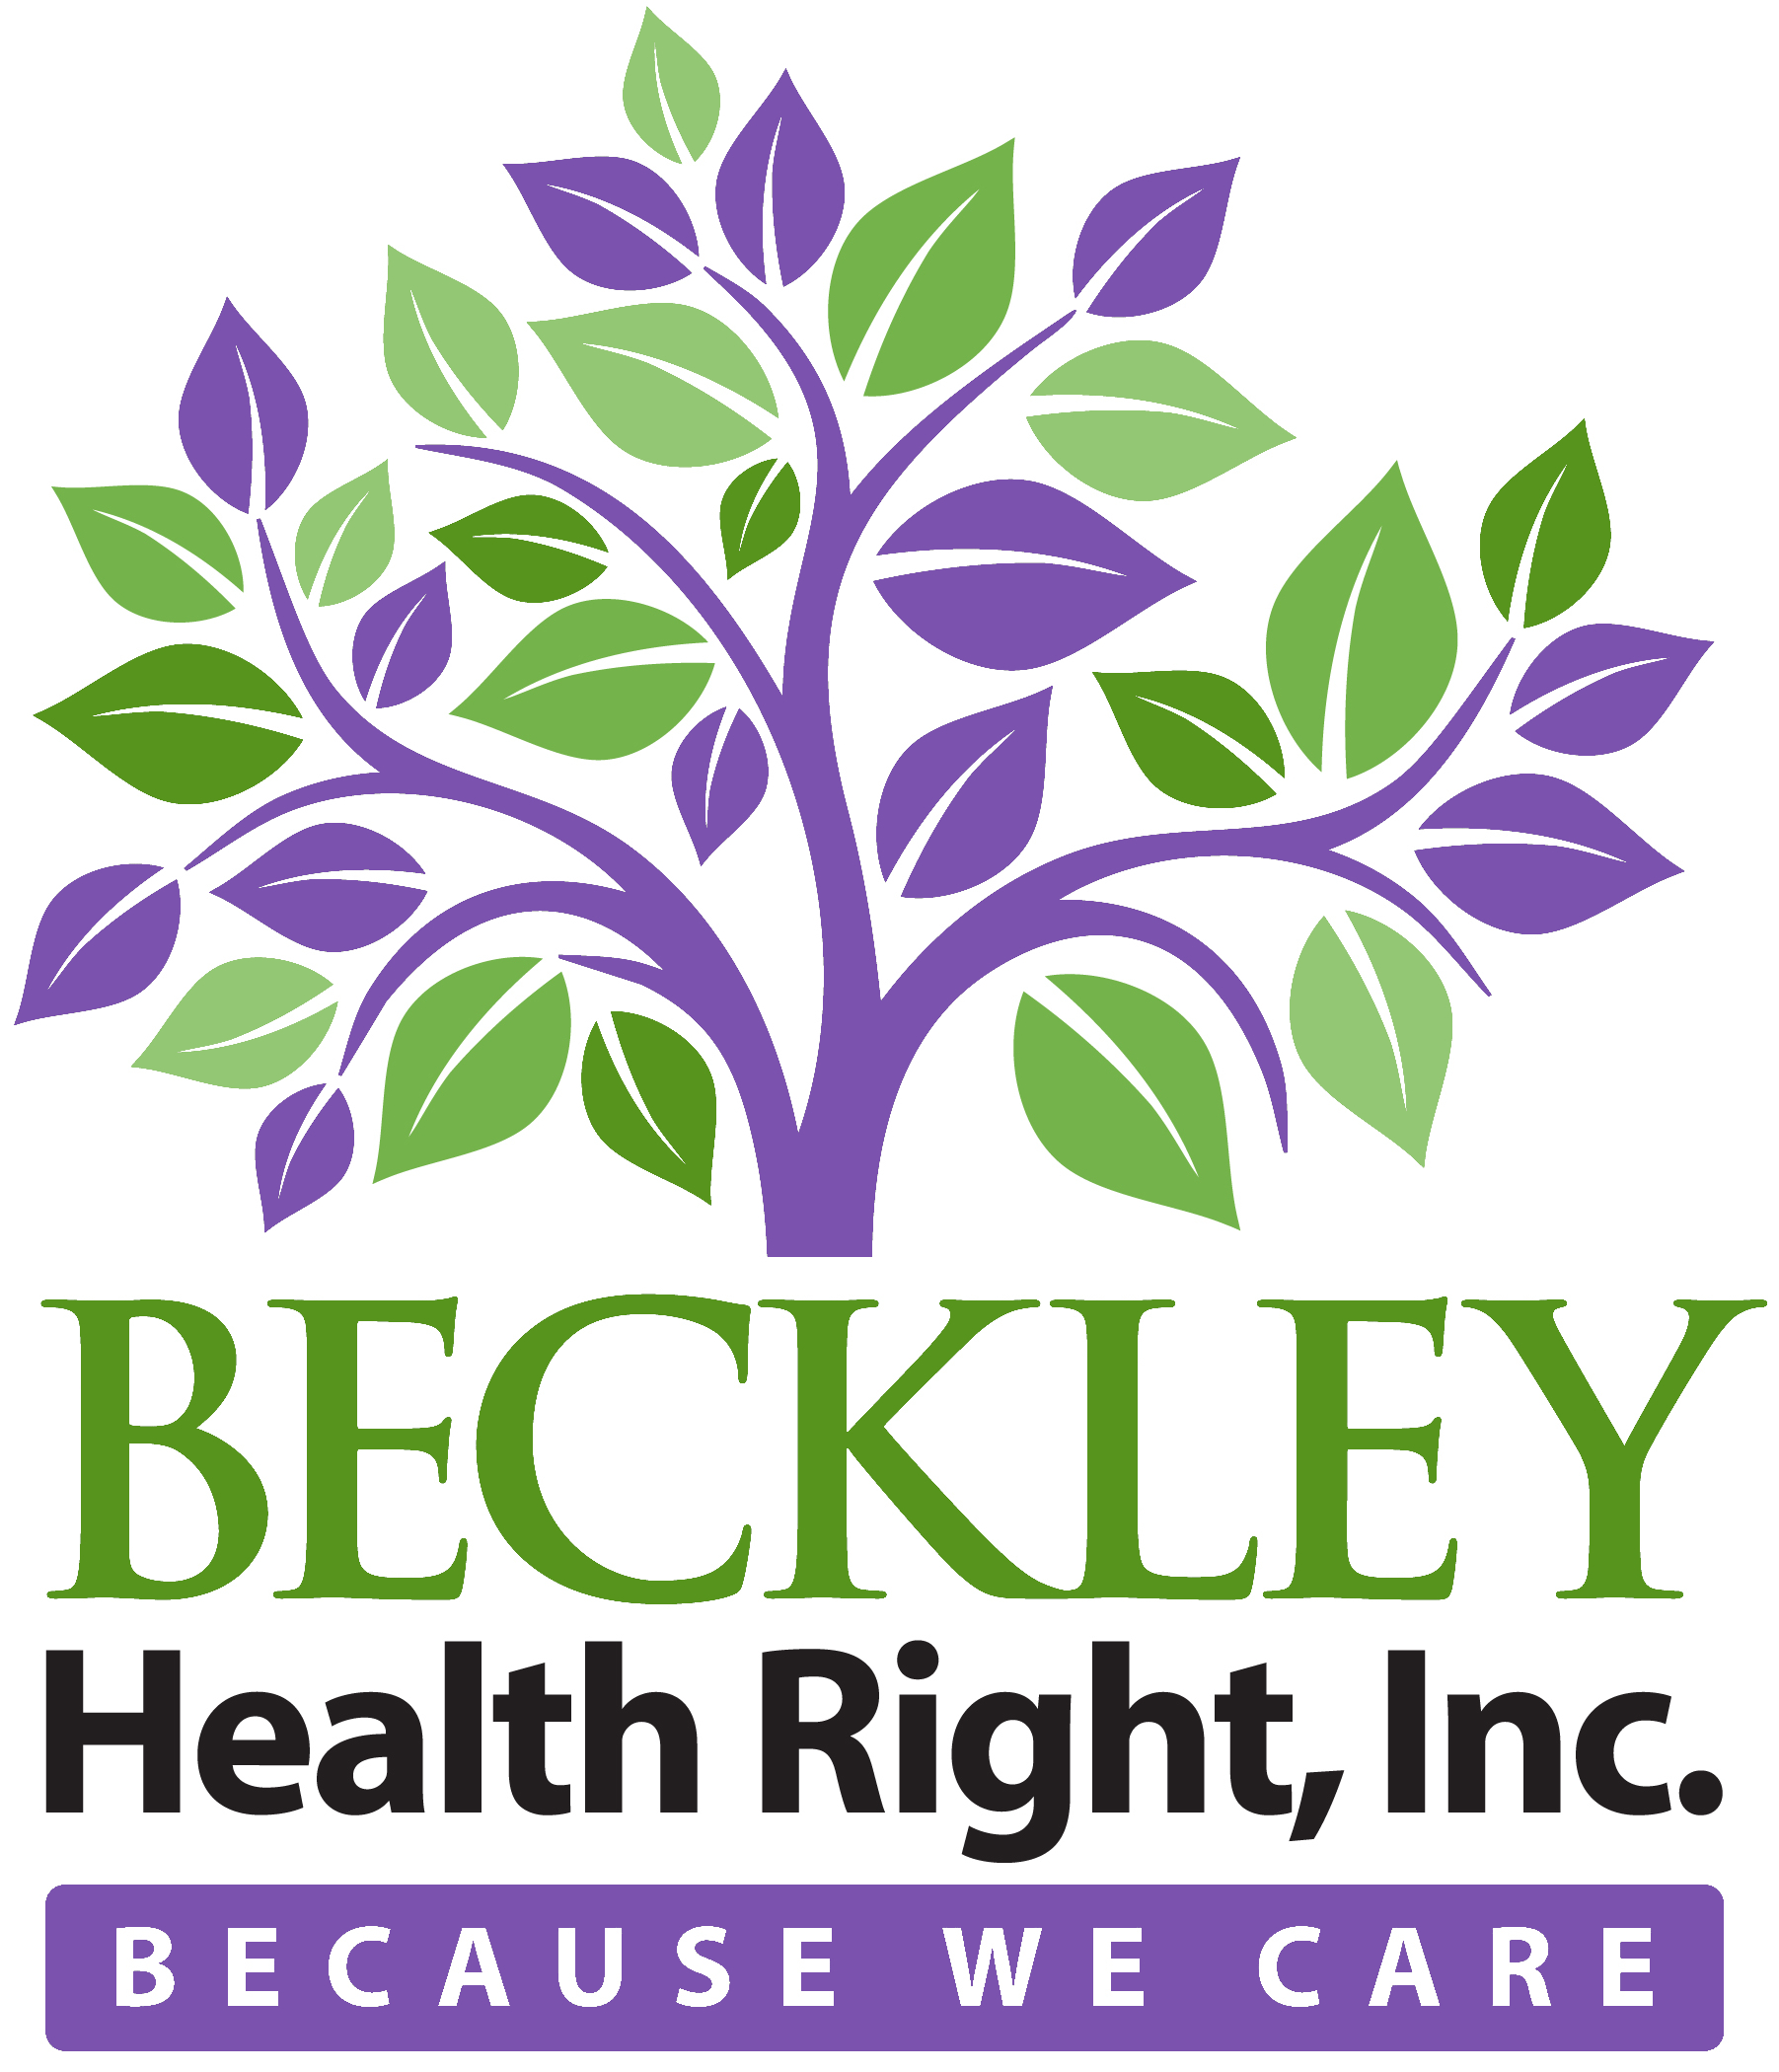 Beckley Health Right, Inc. Because we care